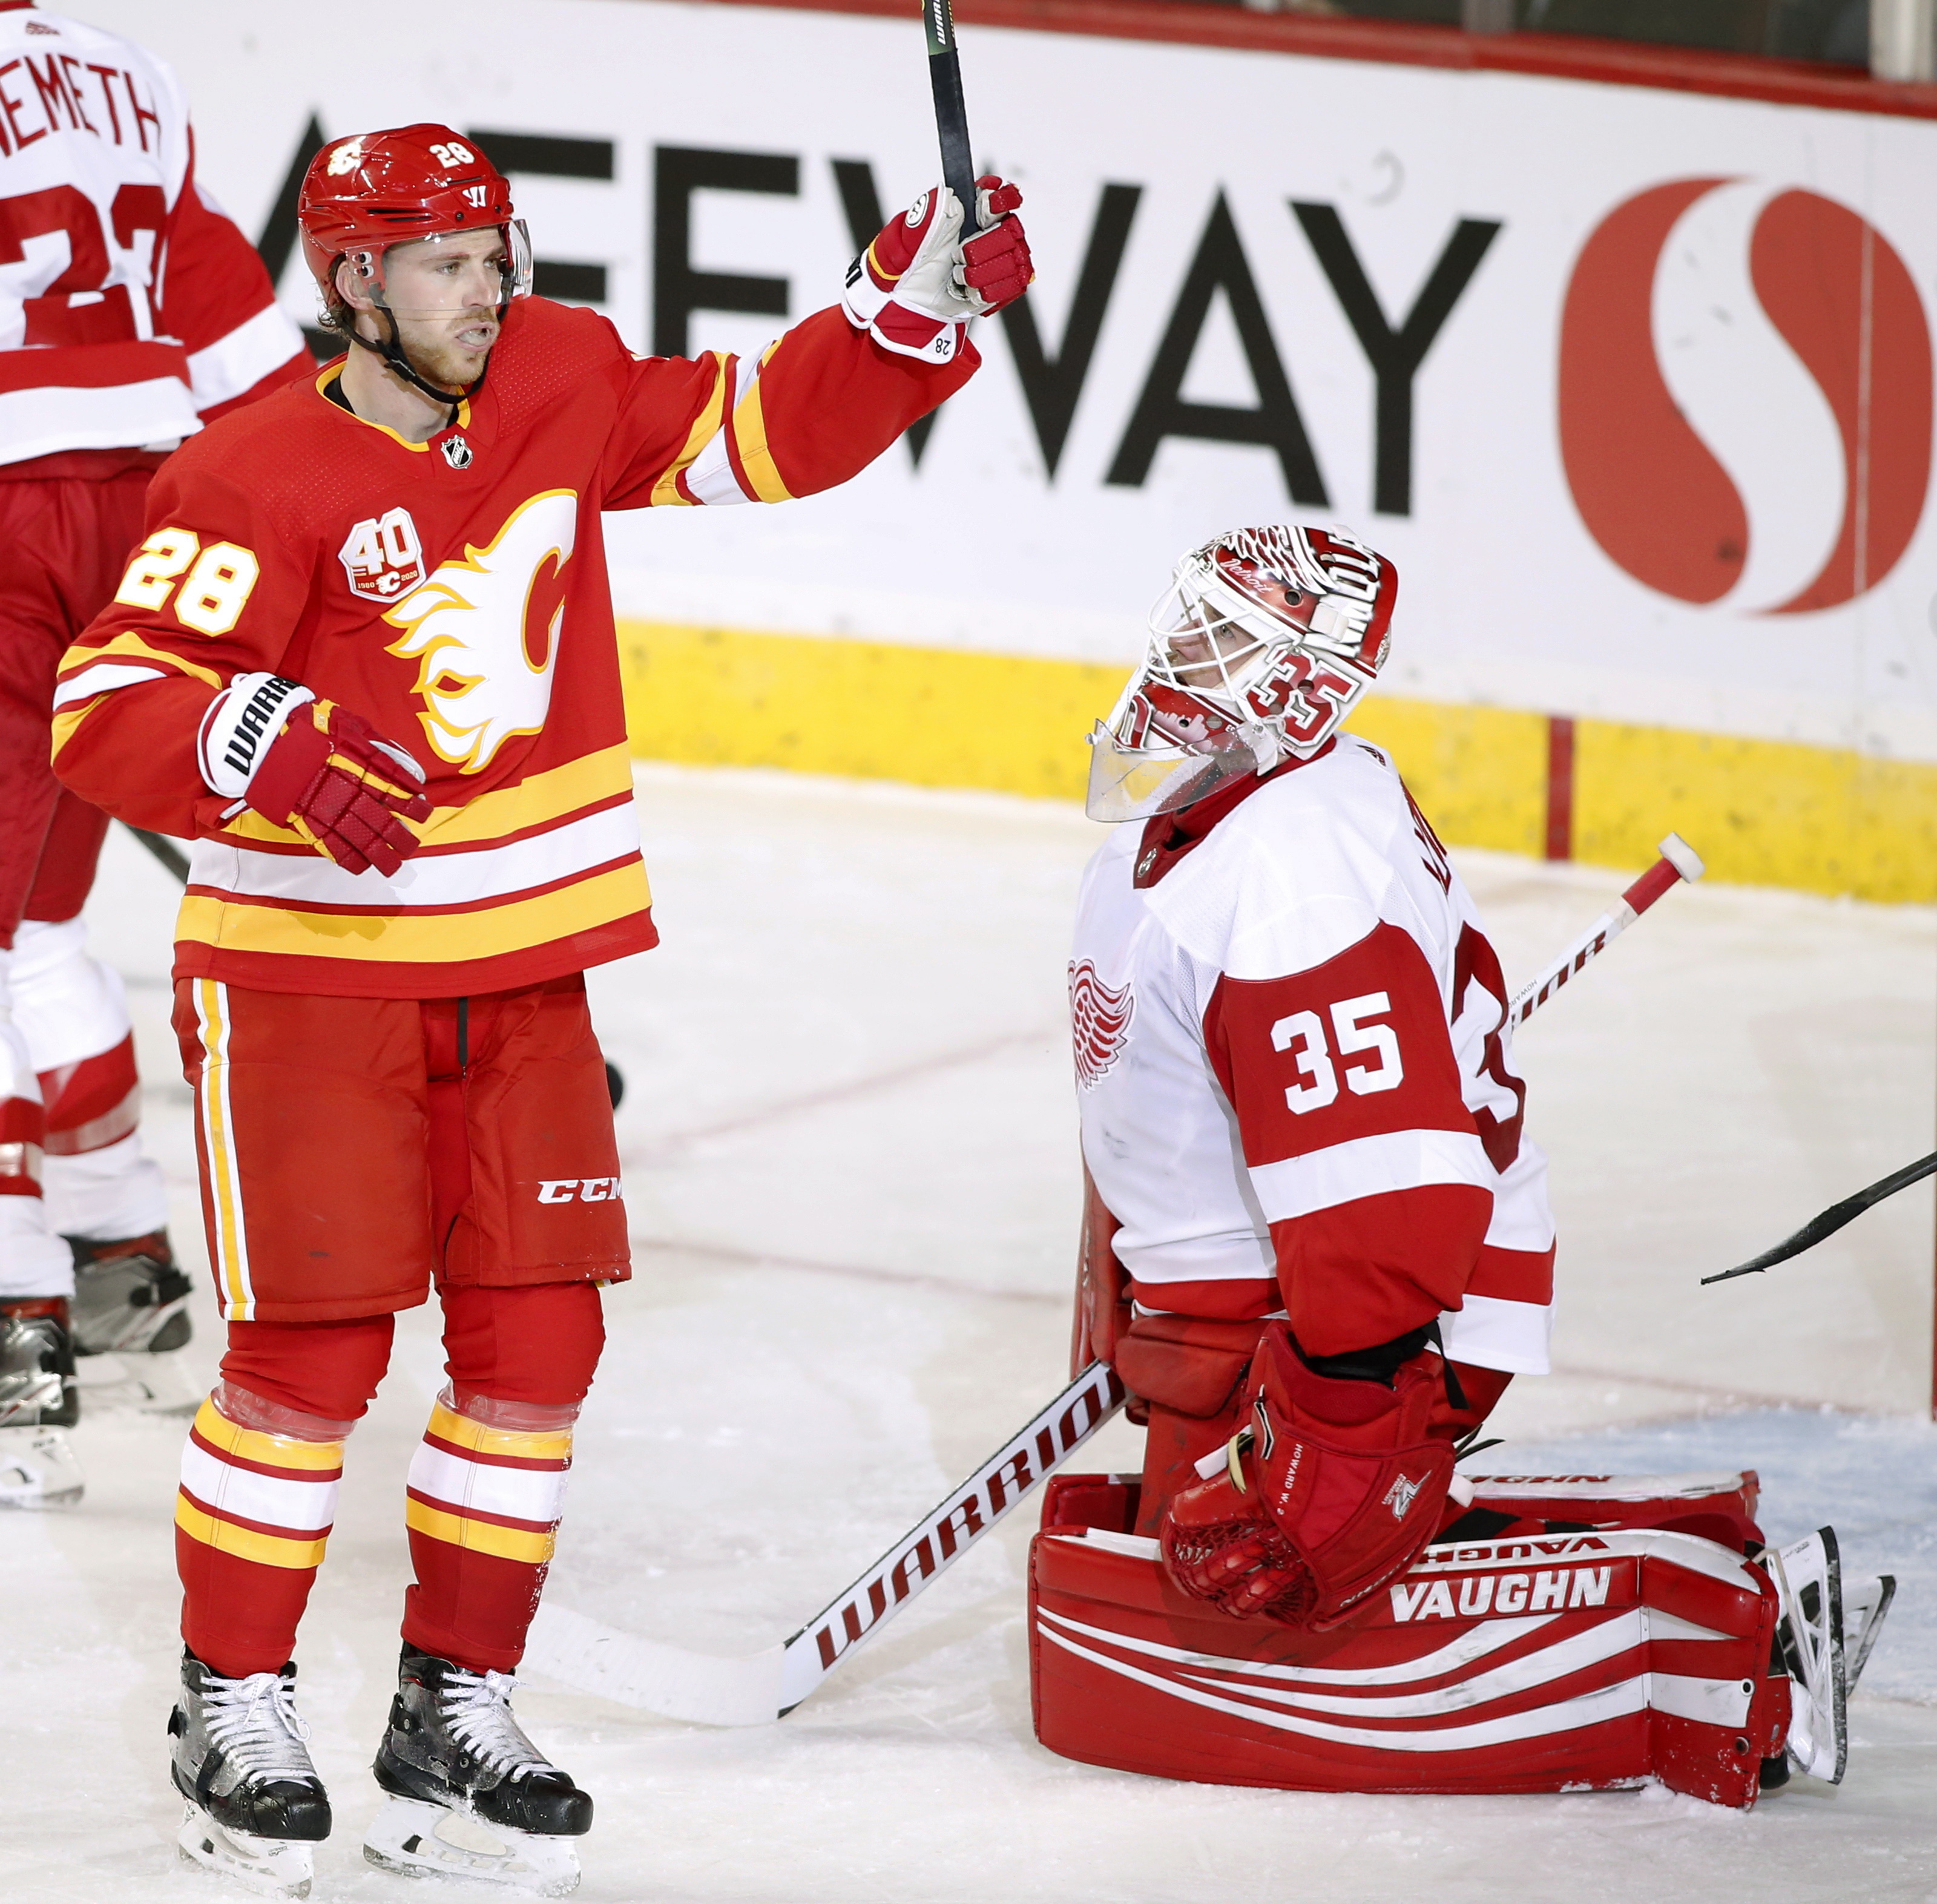 Flames pull away in 3rd, beat Red Wings 5-1